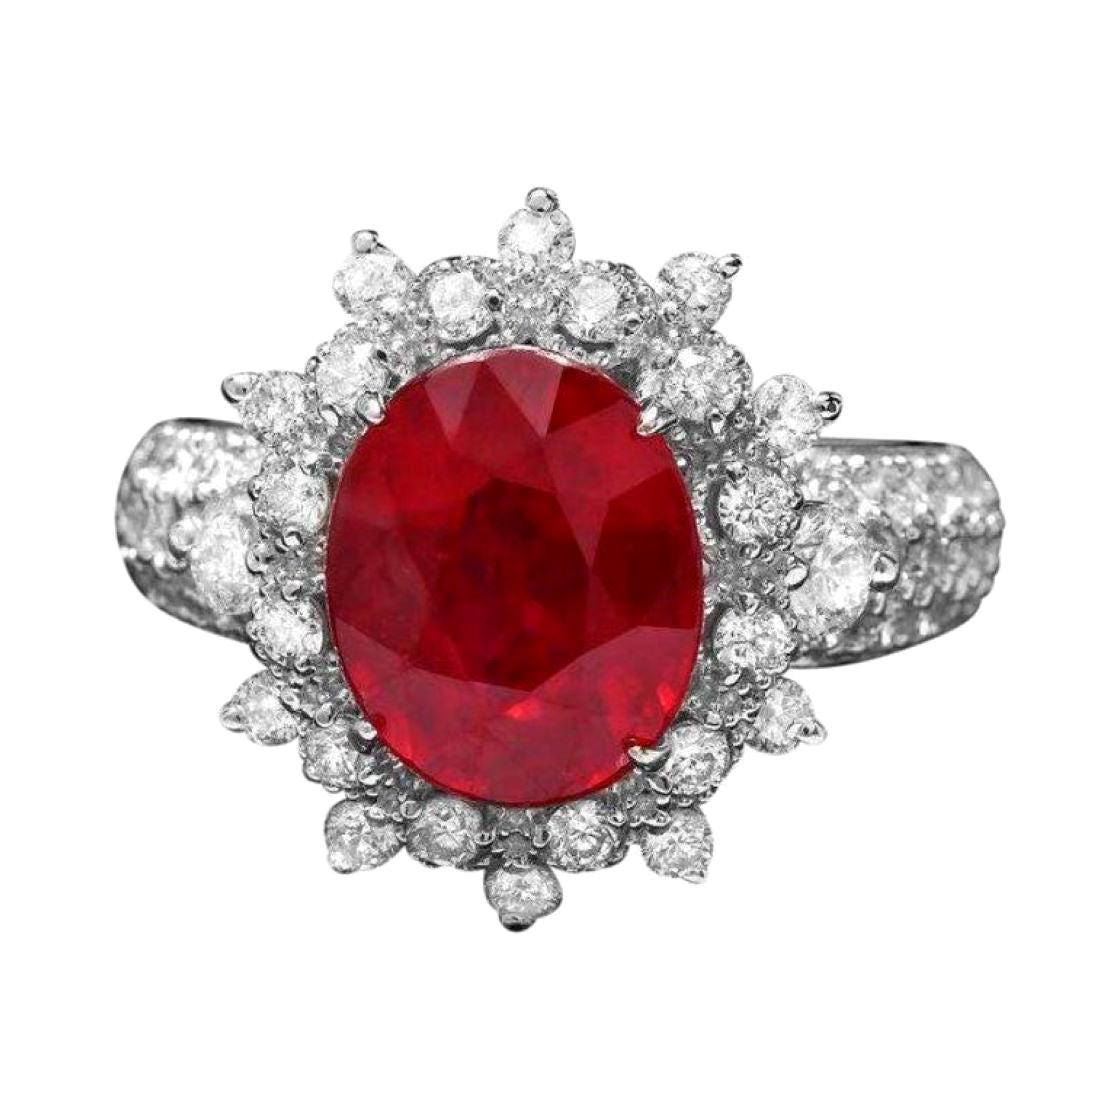 5.70 Carats Natural Red Ruby and Diamond 14k Solid White Gold Ring